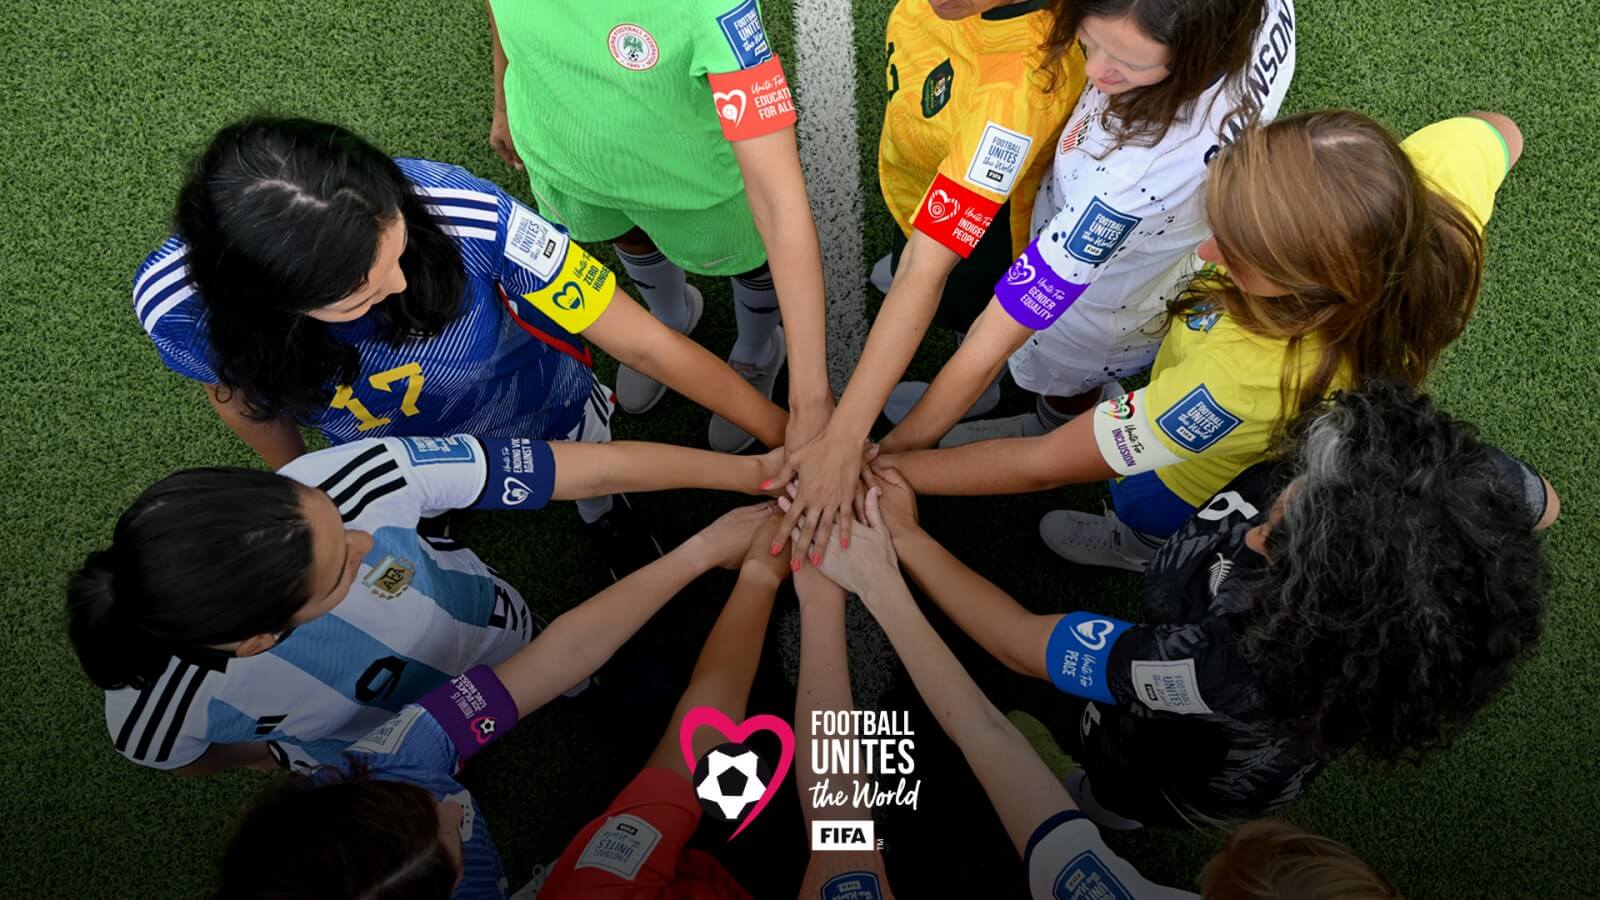 Press release: Women's World Cup 2023 – UN Women and FIFA join